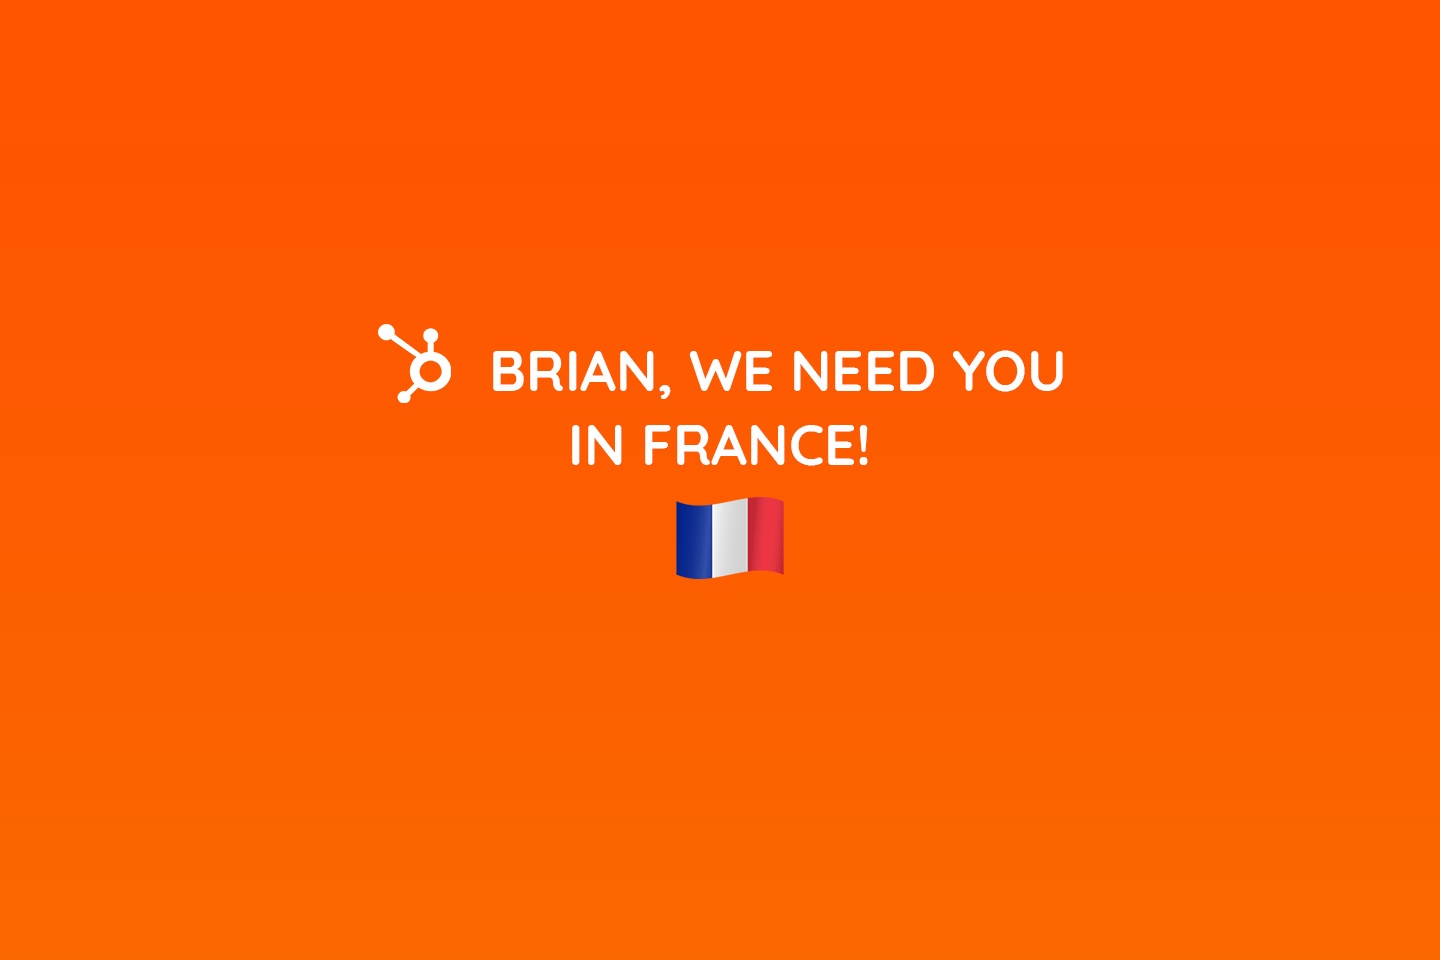 The Brian Campaign: What if HubSpot CEO came to France?